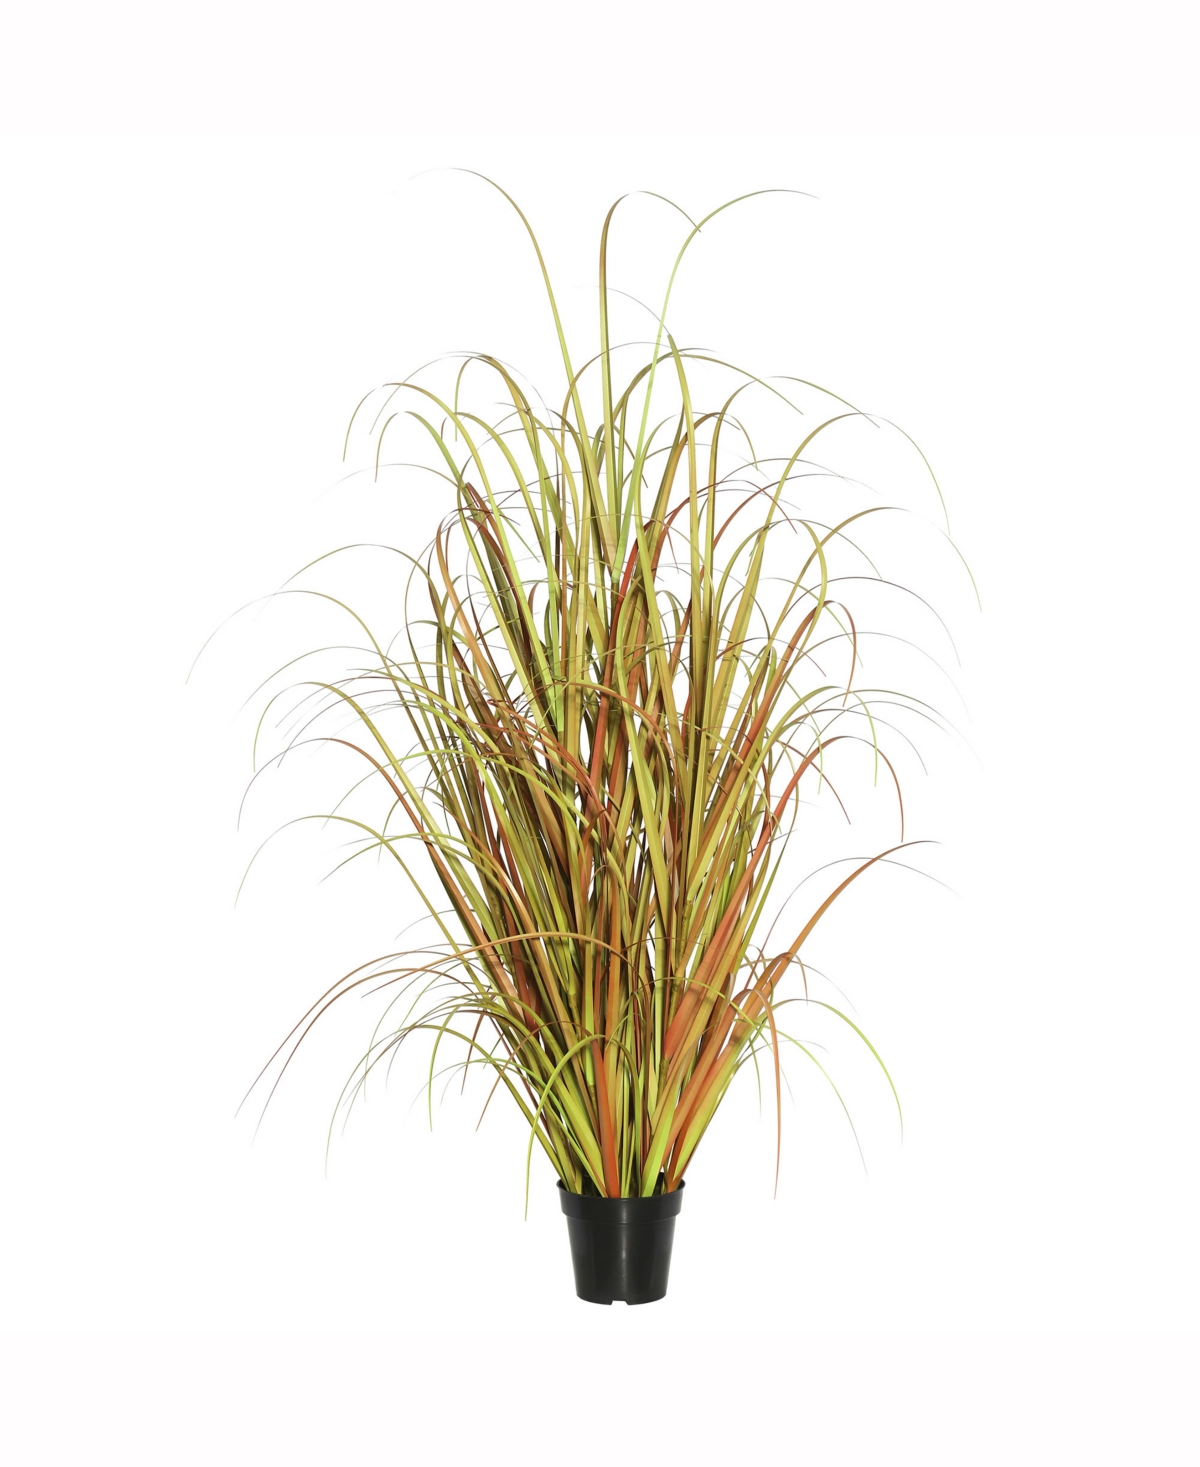 48" Pvc Artificial Potted Mixed Brown Grass X 135